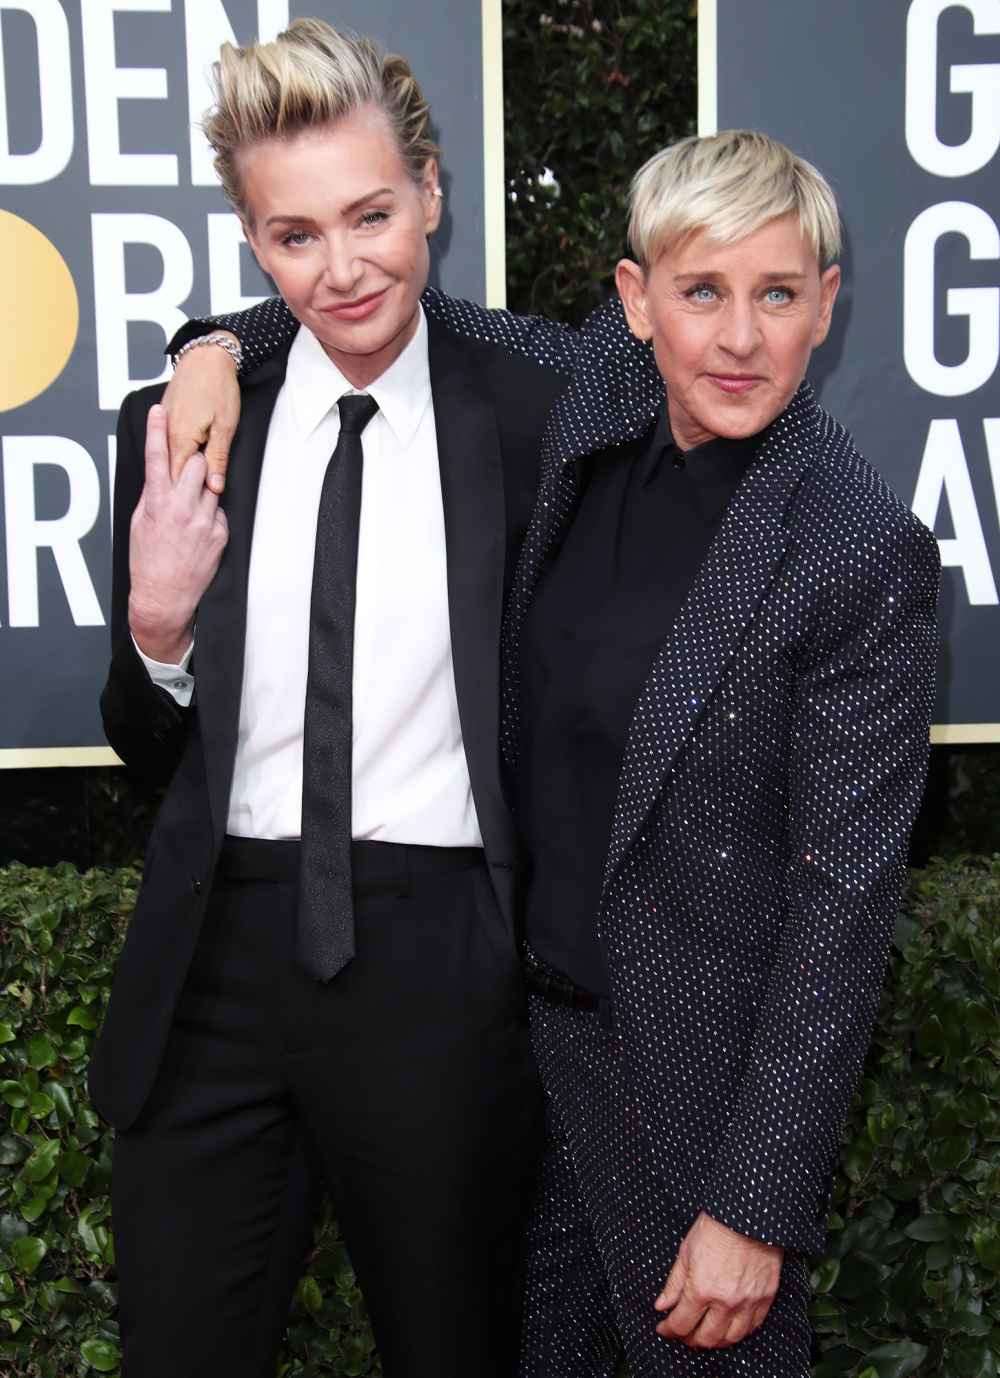 Ellen DeGeneres Says She Found Portia de Rossi ‘on the Floor on All Fours’ Before Emergency Appendectomy